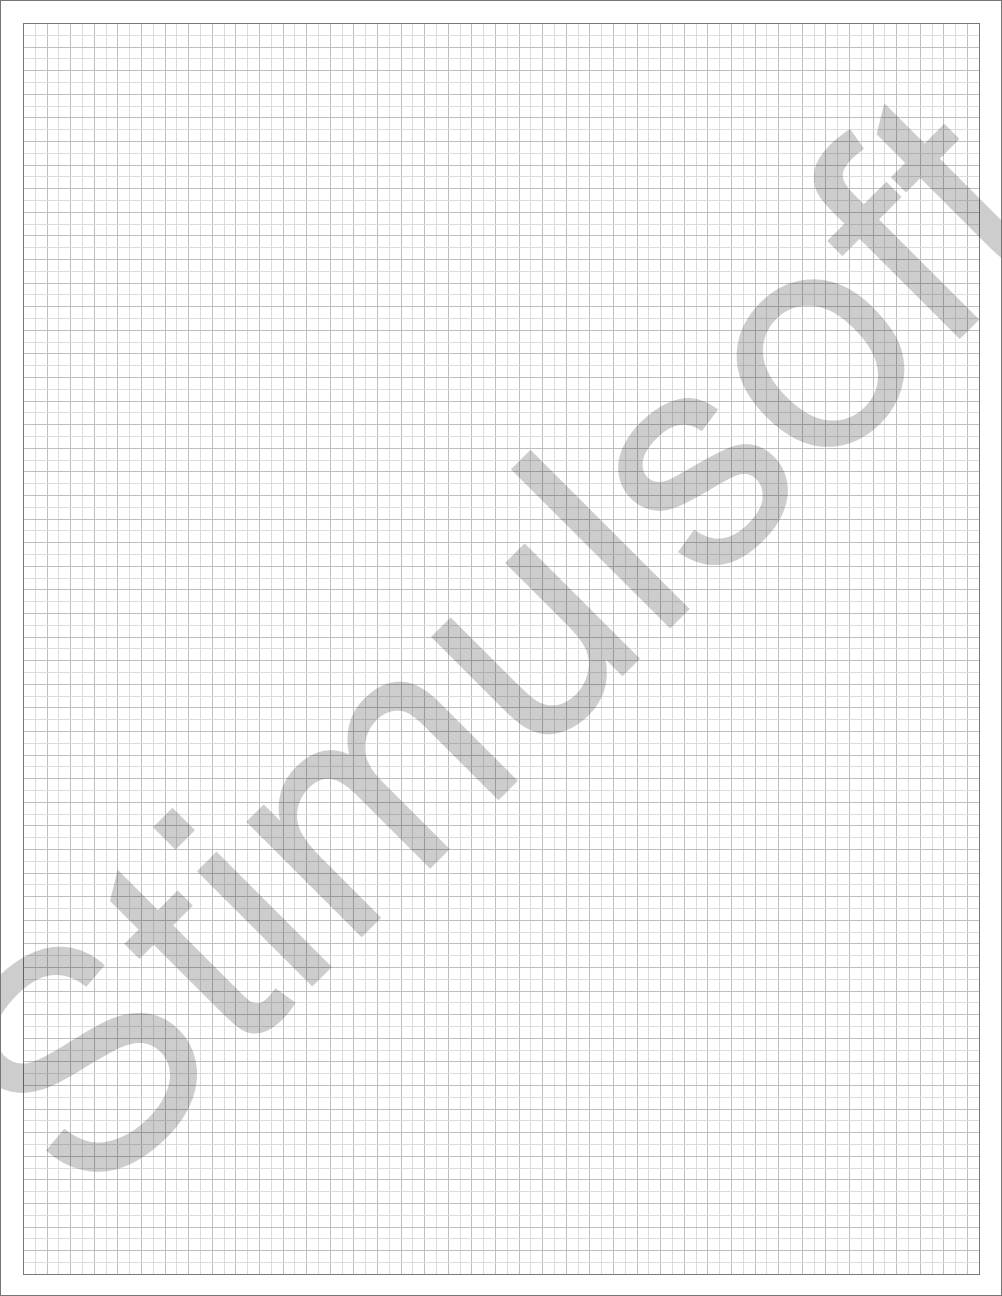 Watermark on Page